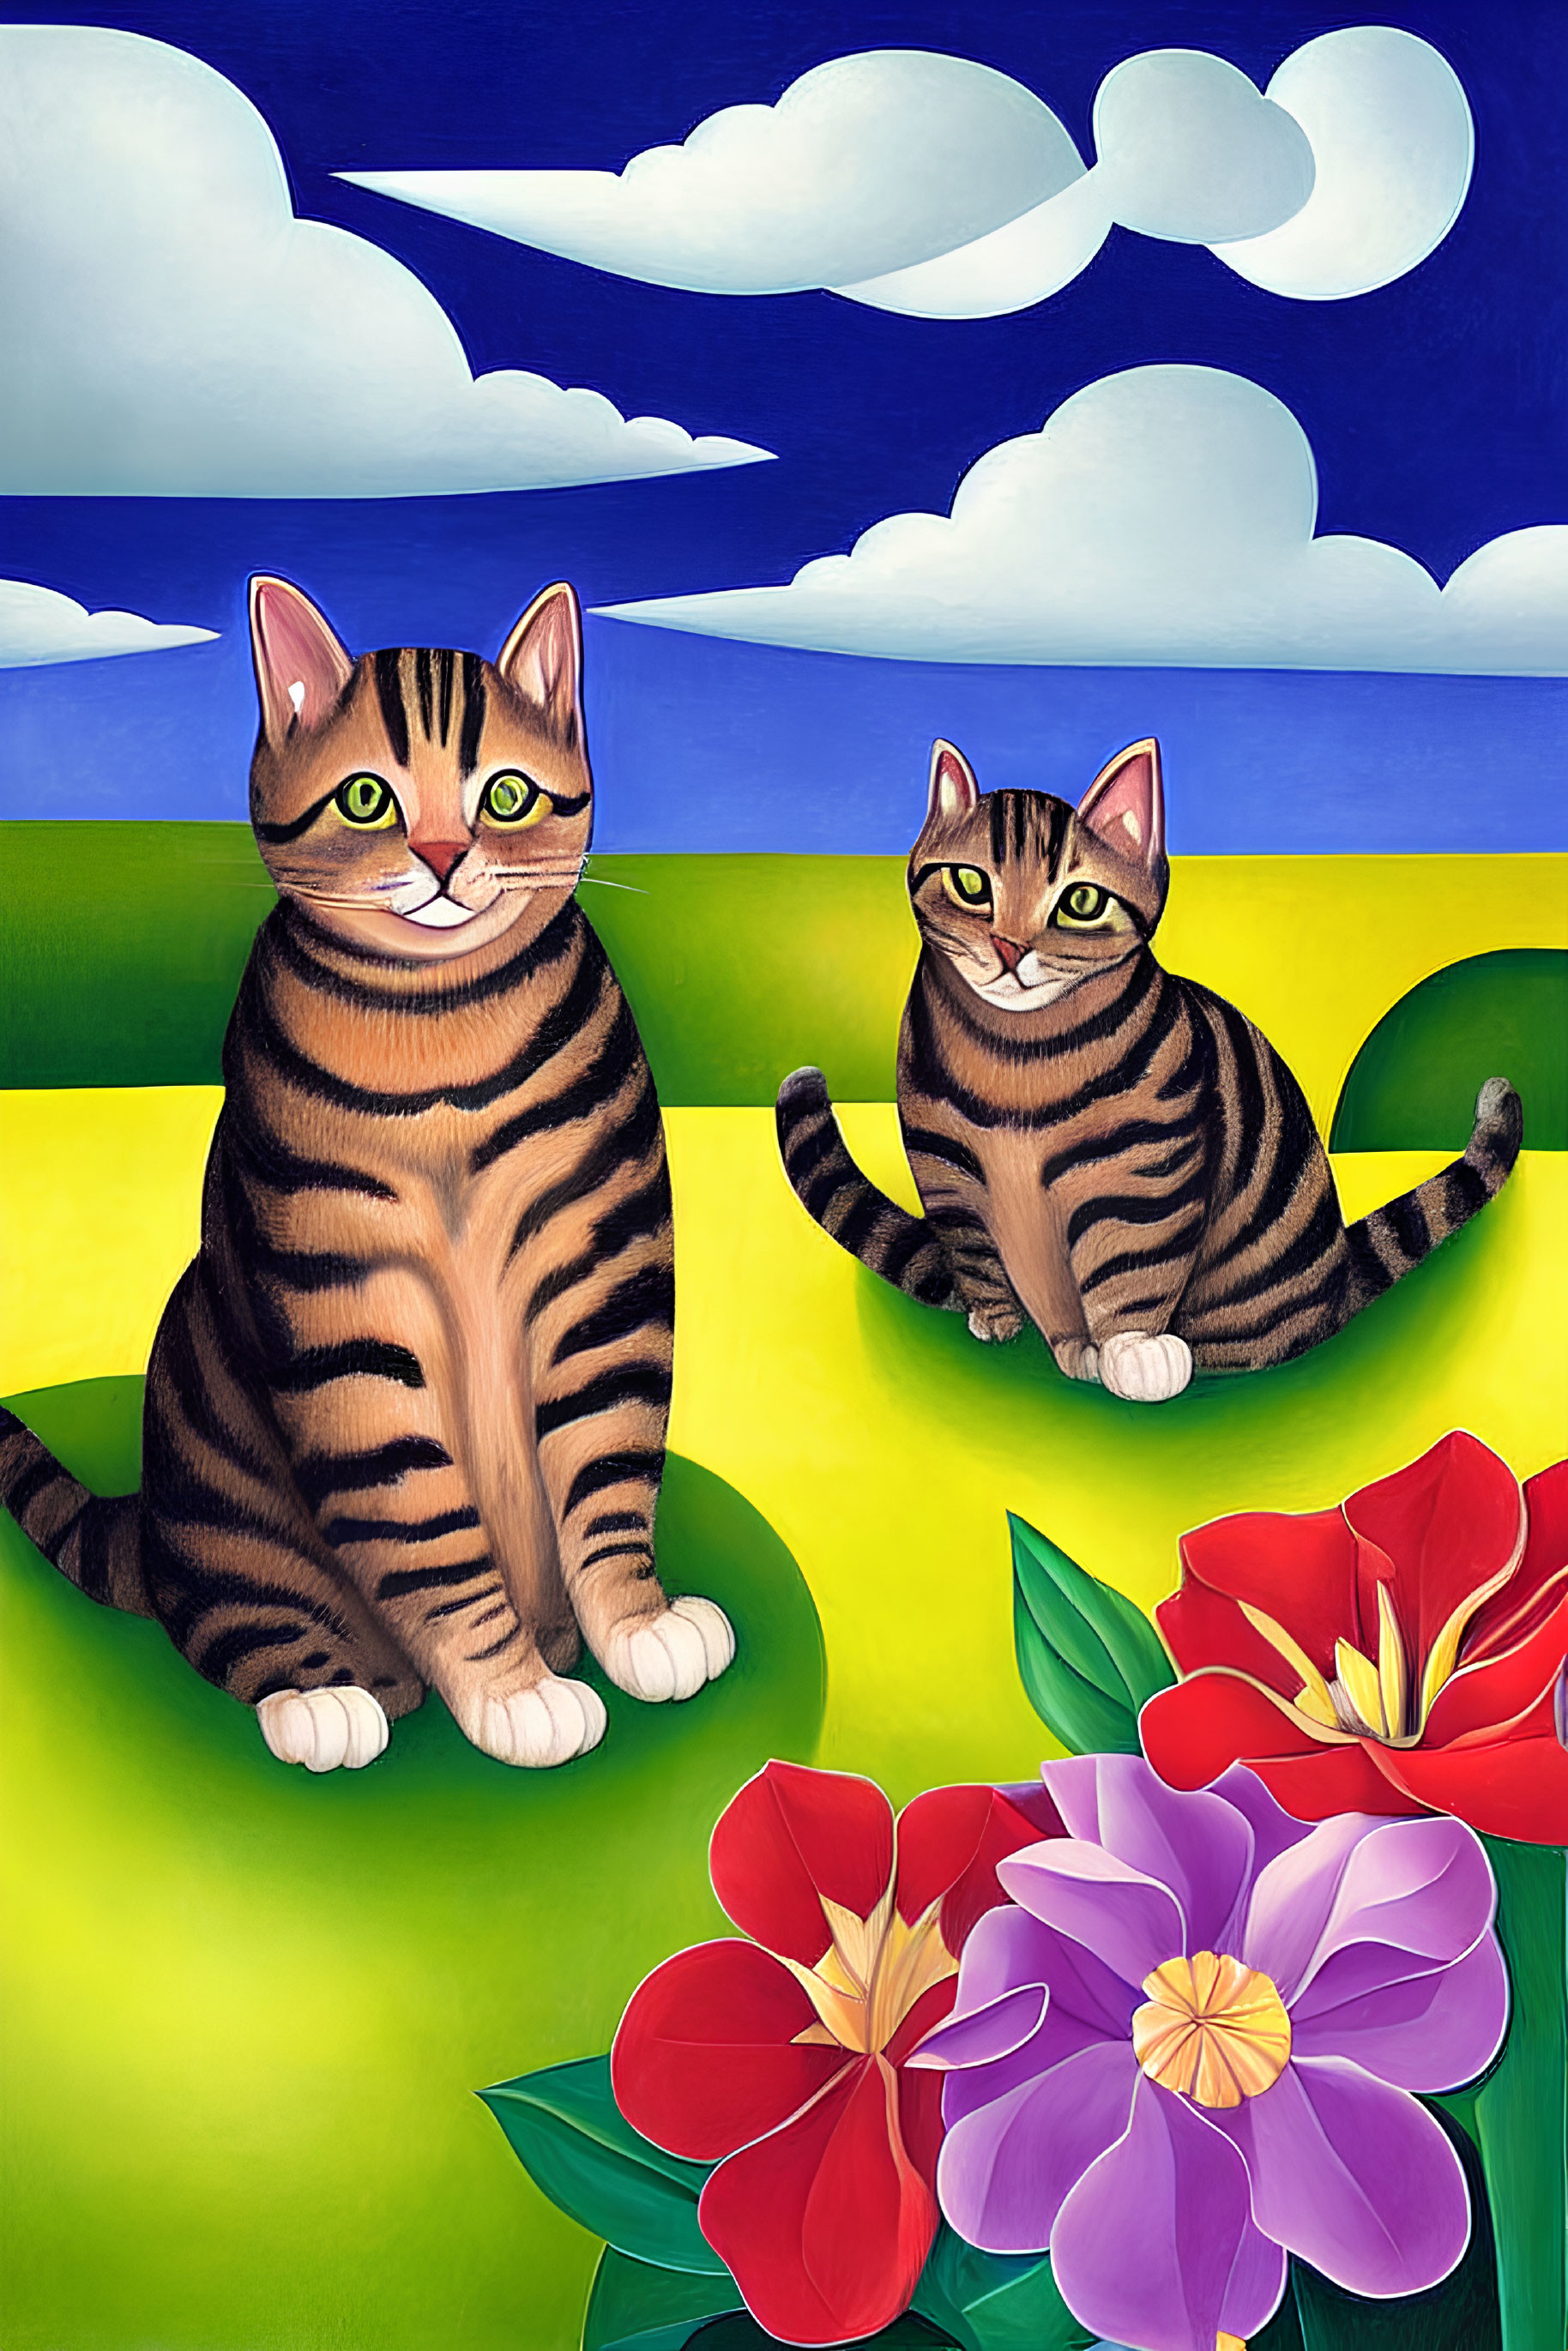 Stylized striped cats in colorful landscape with flowers under blue sky